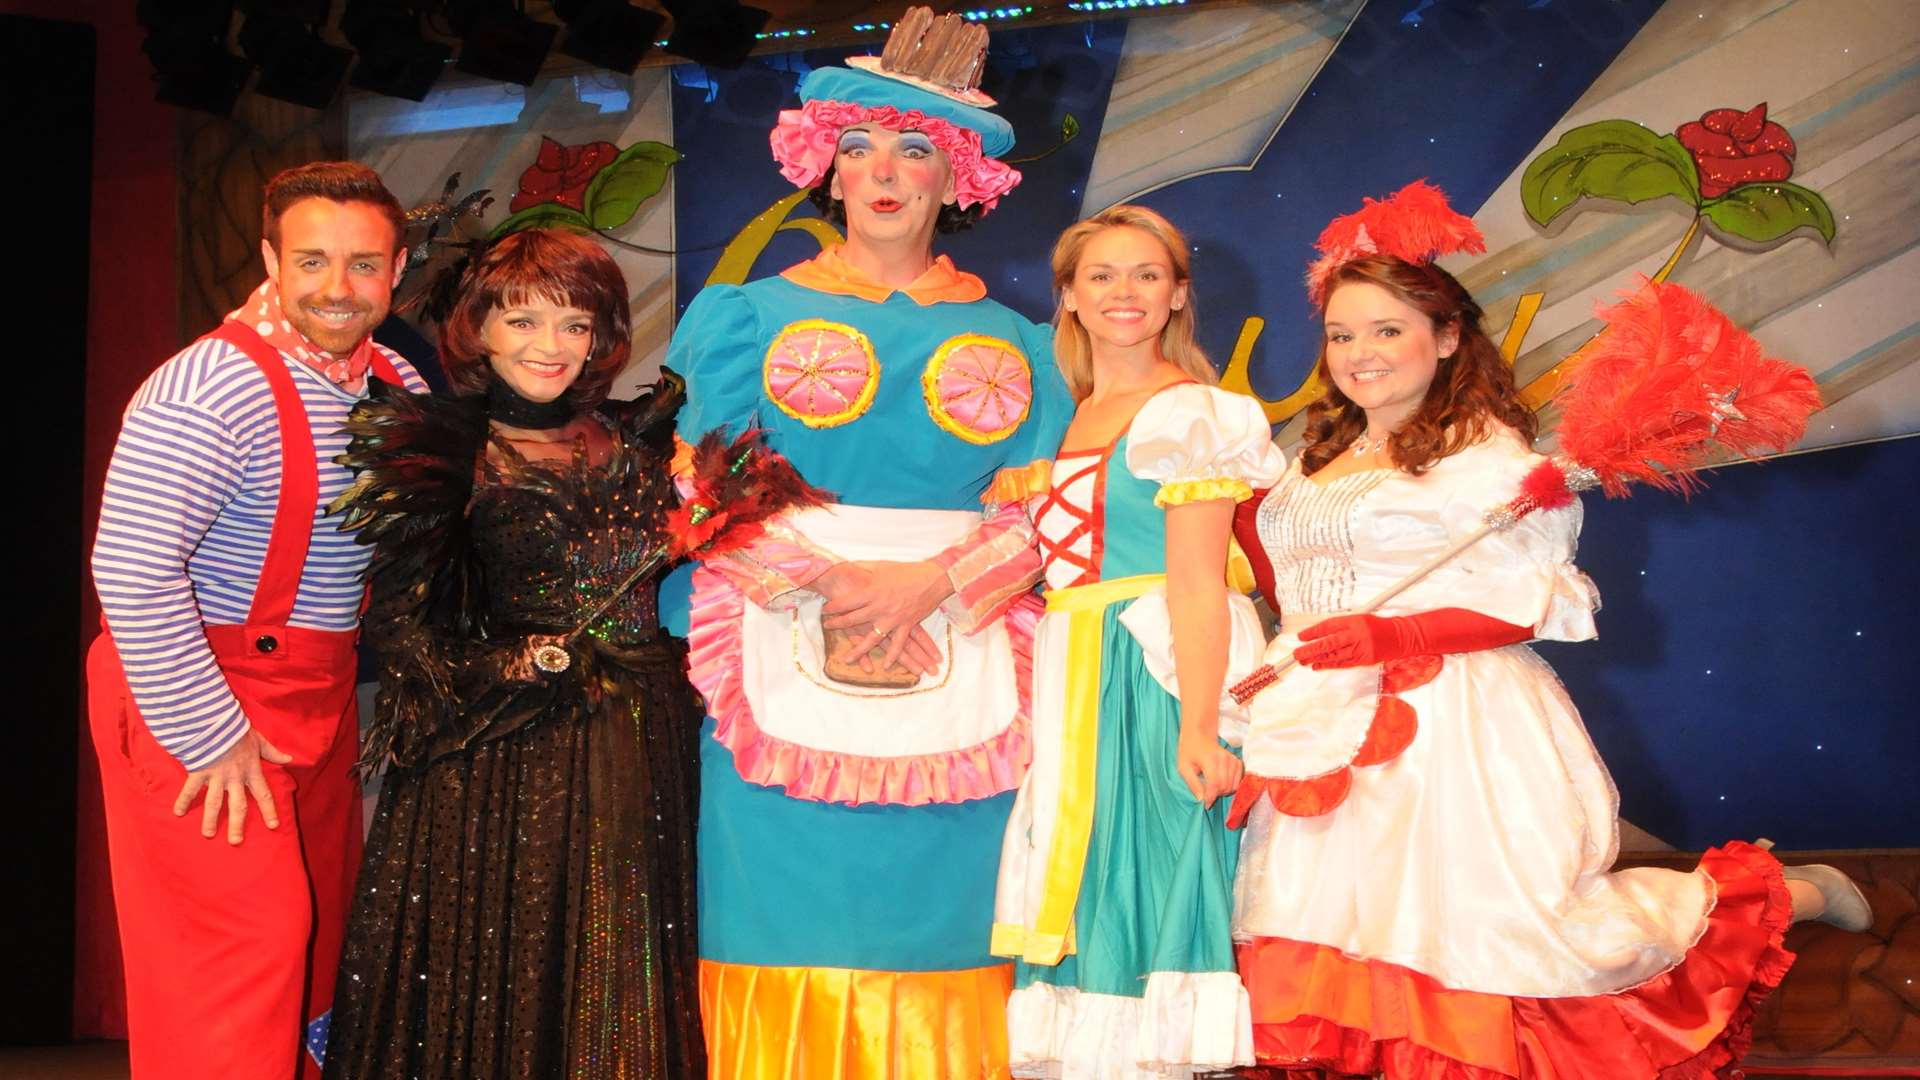 Stevi Ritchie as Potty Pierre, Sue Holderness as Malevolent, Michael Neilson as Dame Dotty Derier, Katy Ray as Beauty, and Sarah Lark as Fairy Formidable.